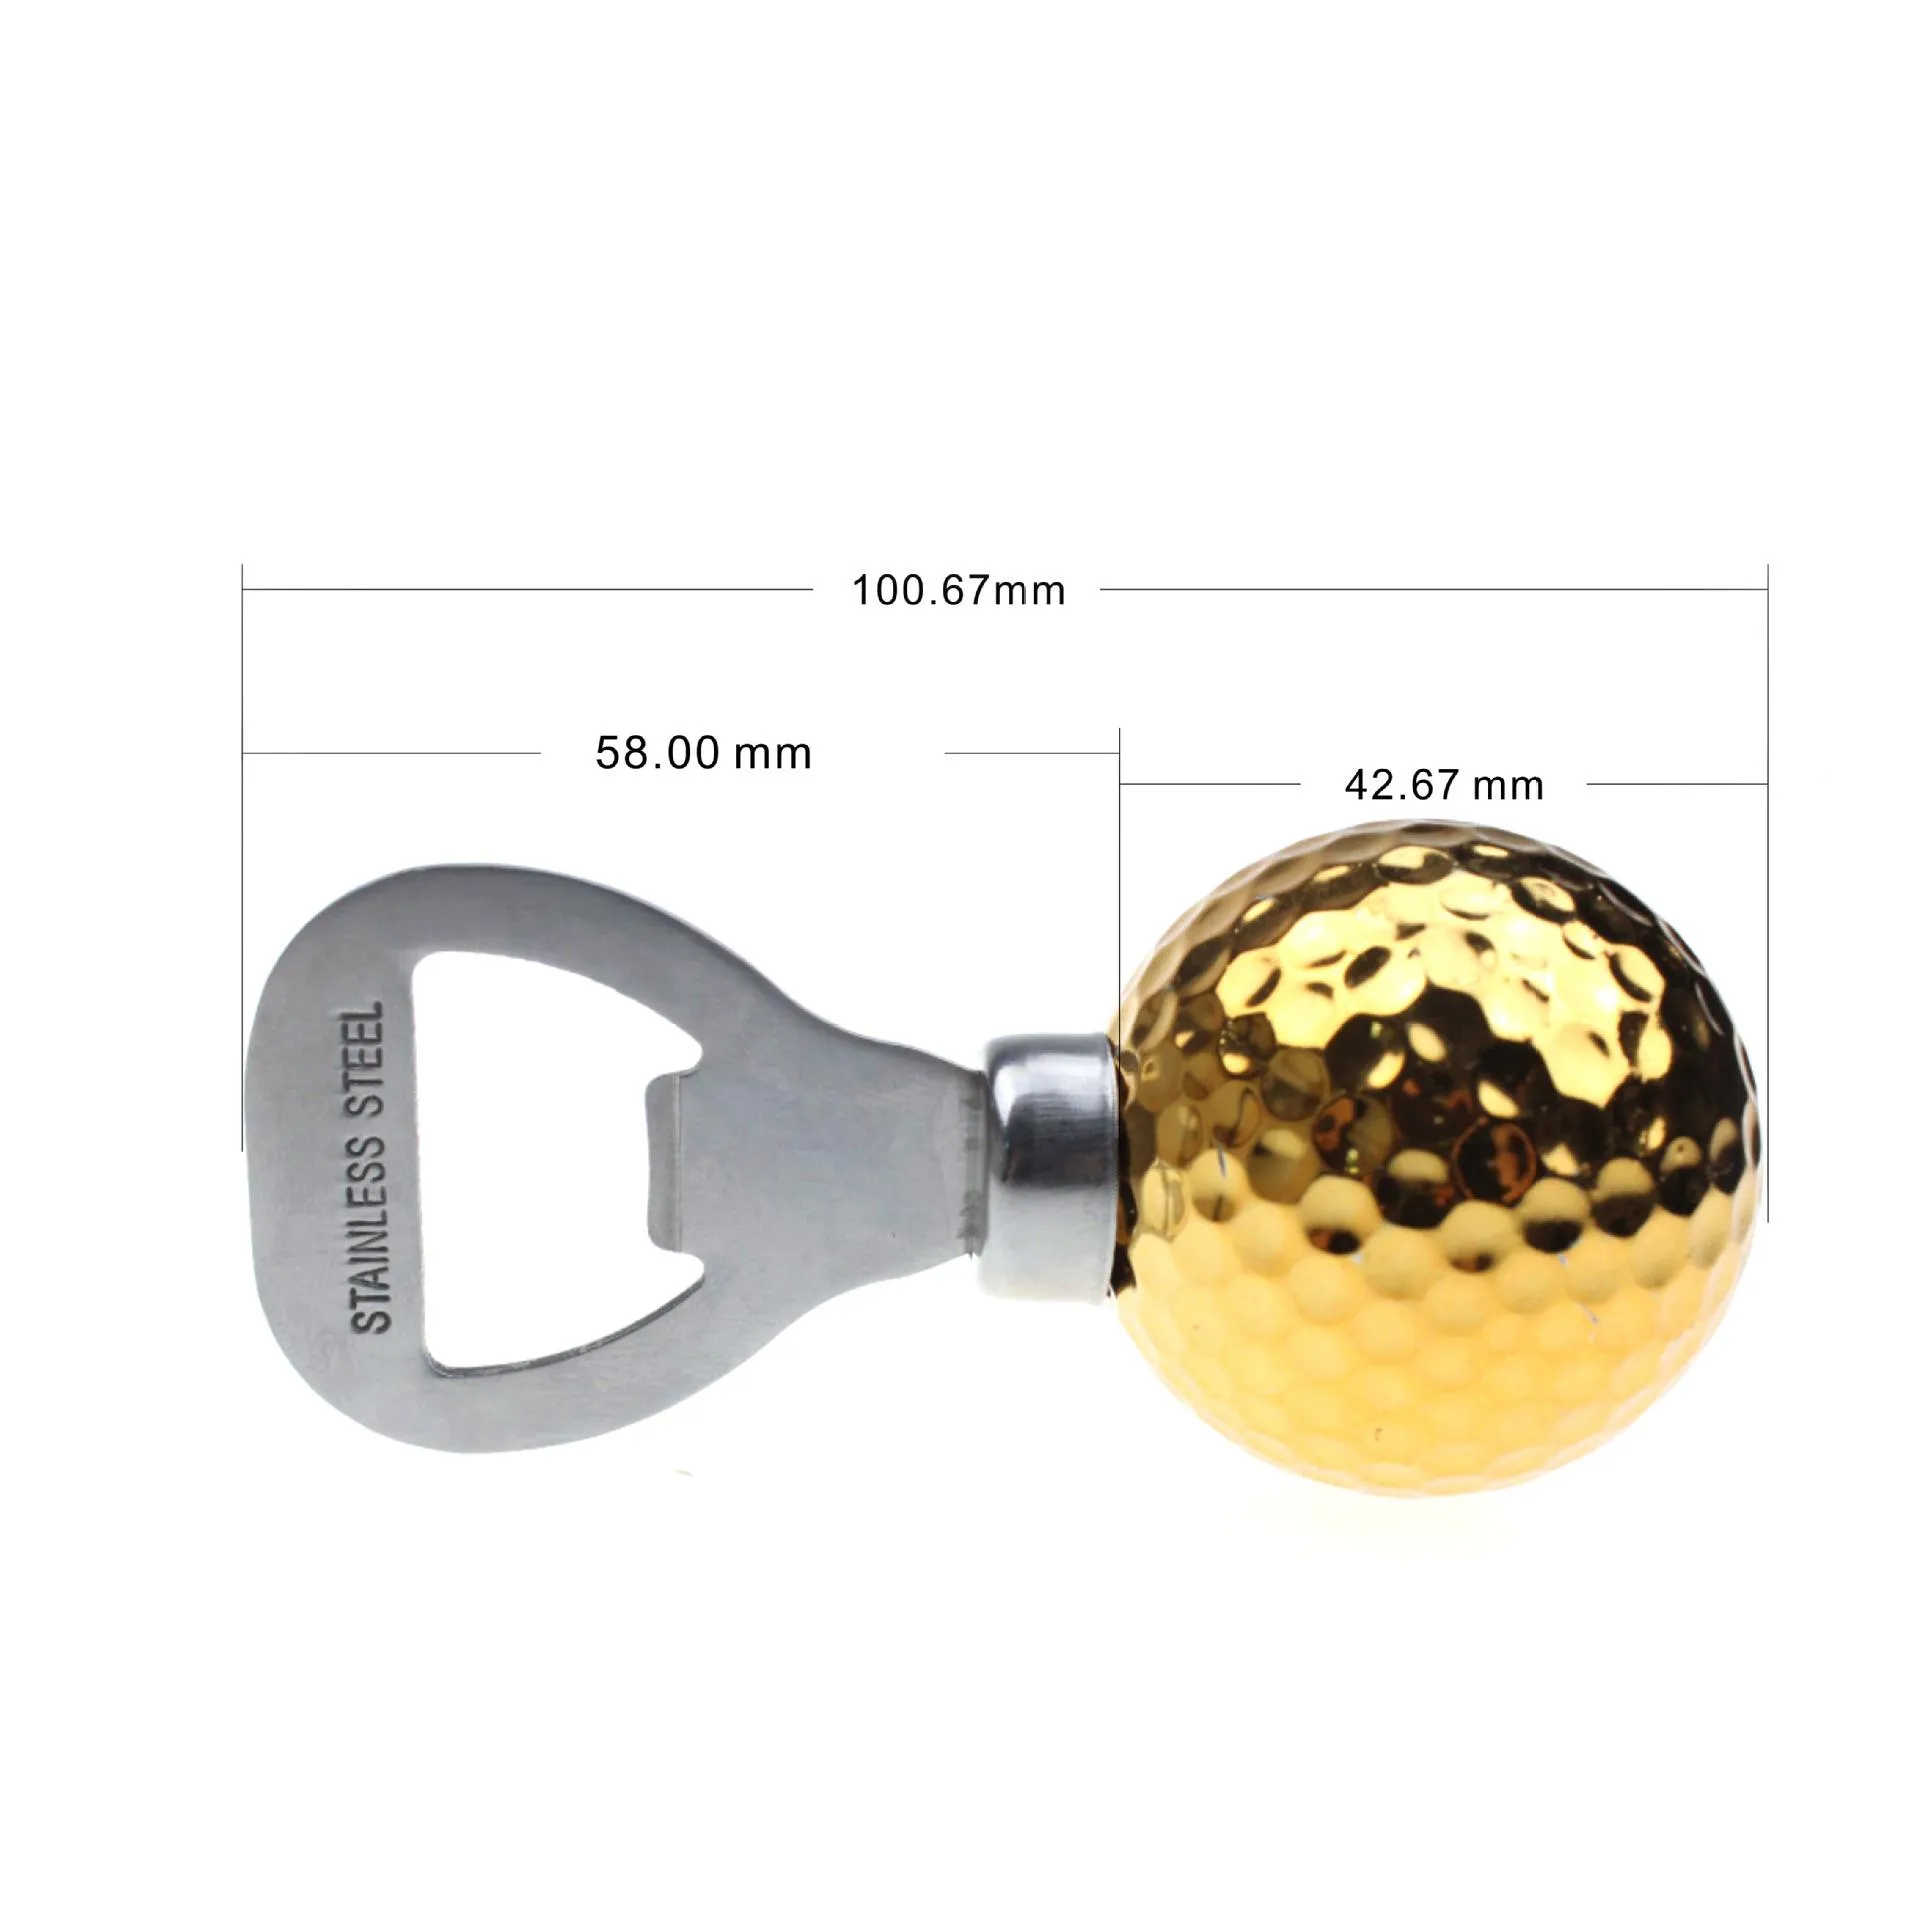 Golf Ball-Shaped Beer Bottle Opener Stainless Steel Beer Opener Corkscrew Home Bar Kitchen Accessory DH5870